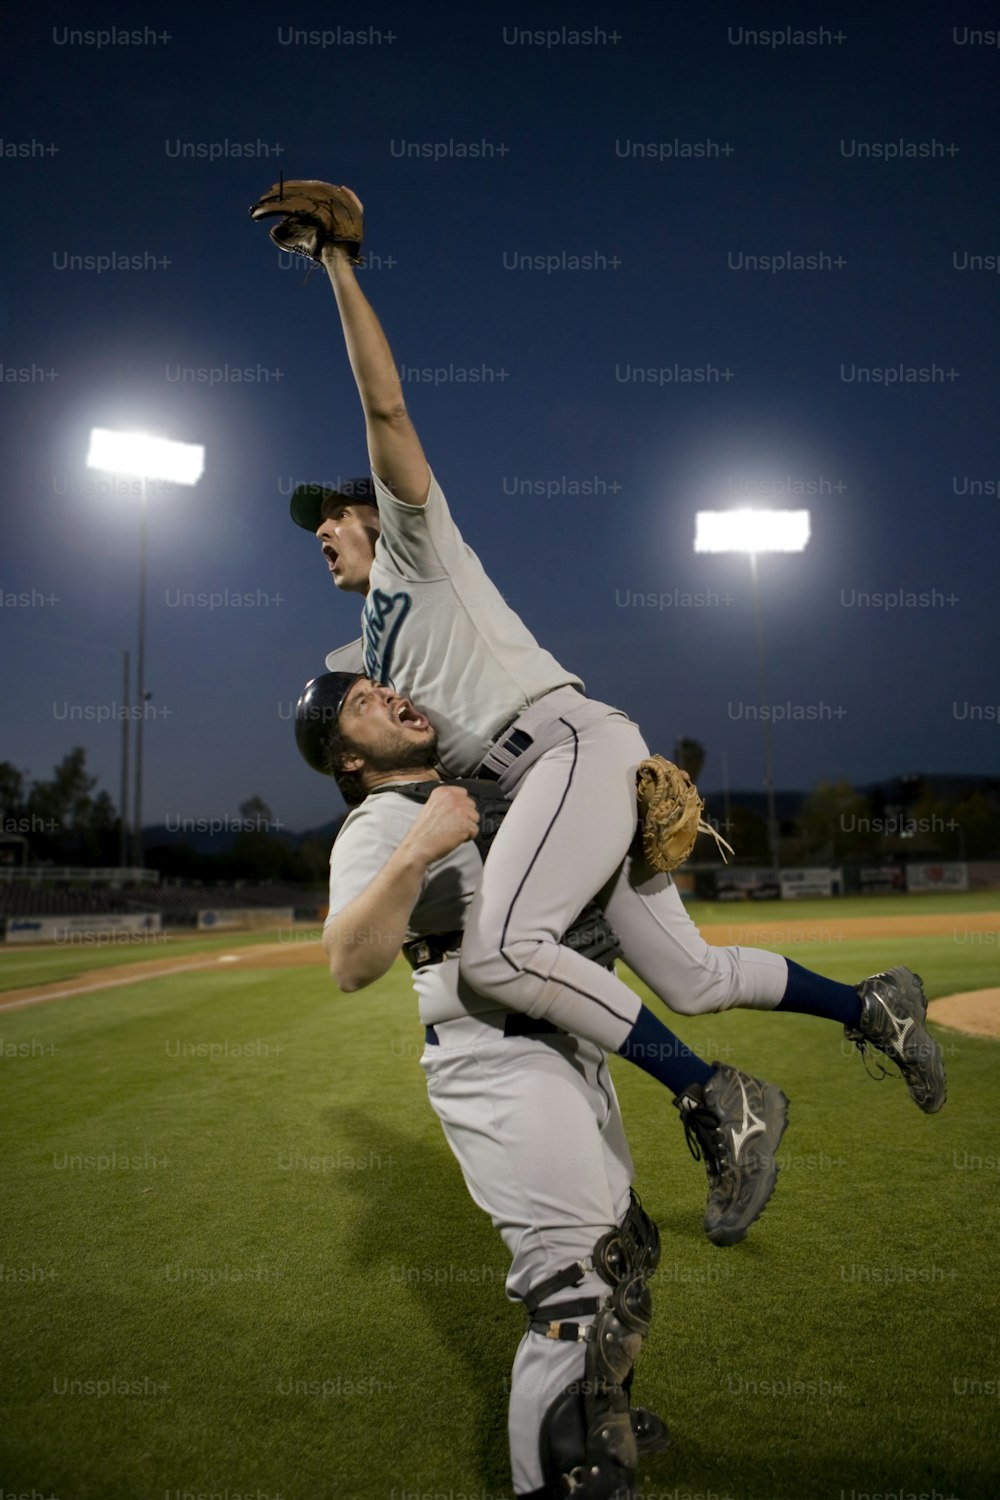 a couple of men standing on top of a baseball field